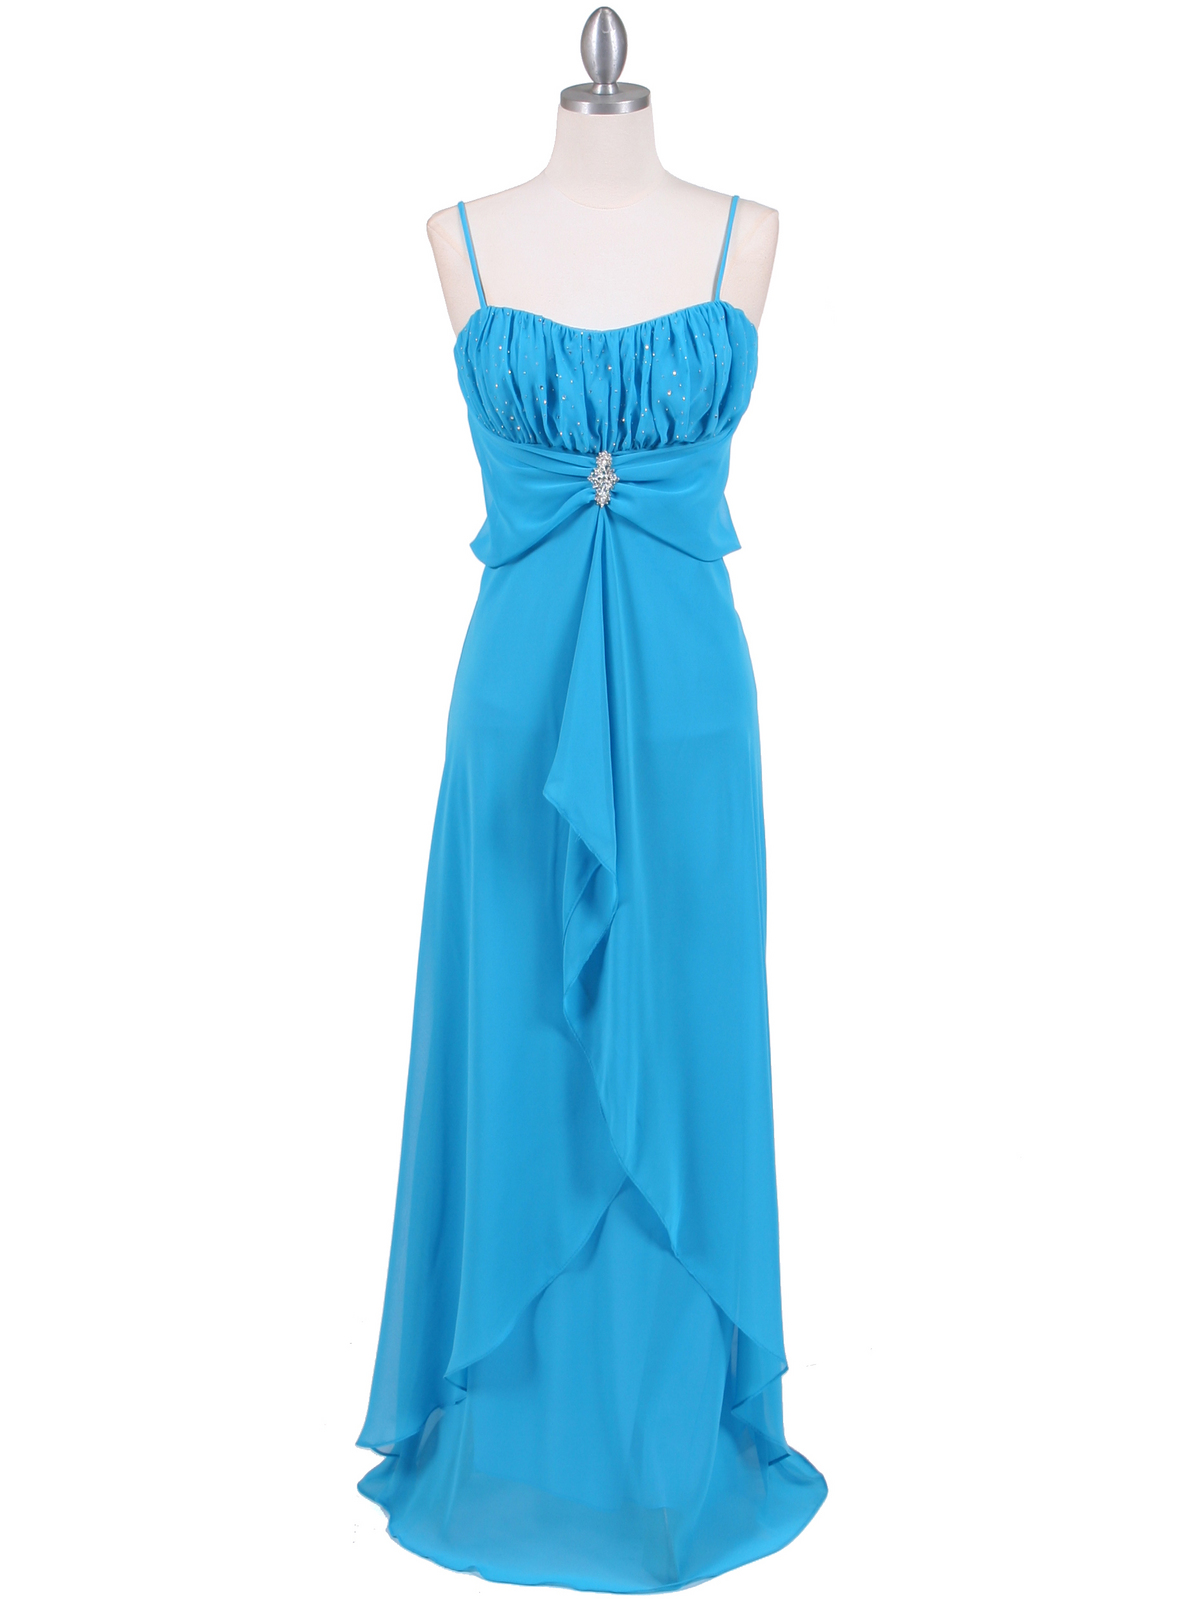 Turquoise Chiffon Evening Dress from Sung Boutique Los Angeles, 